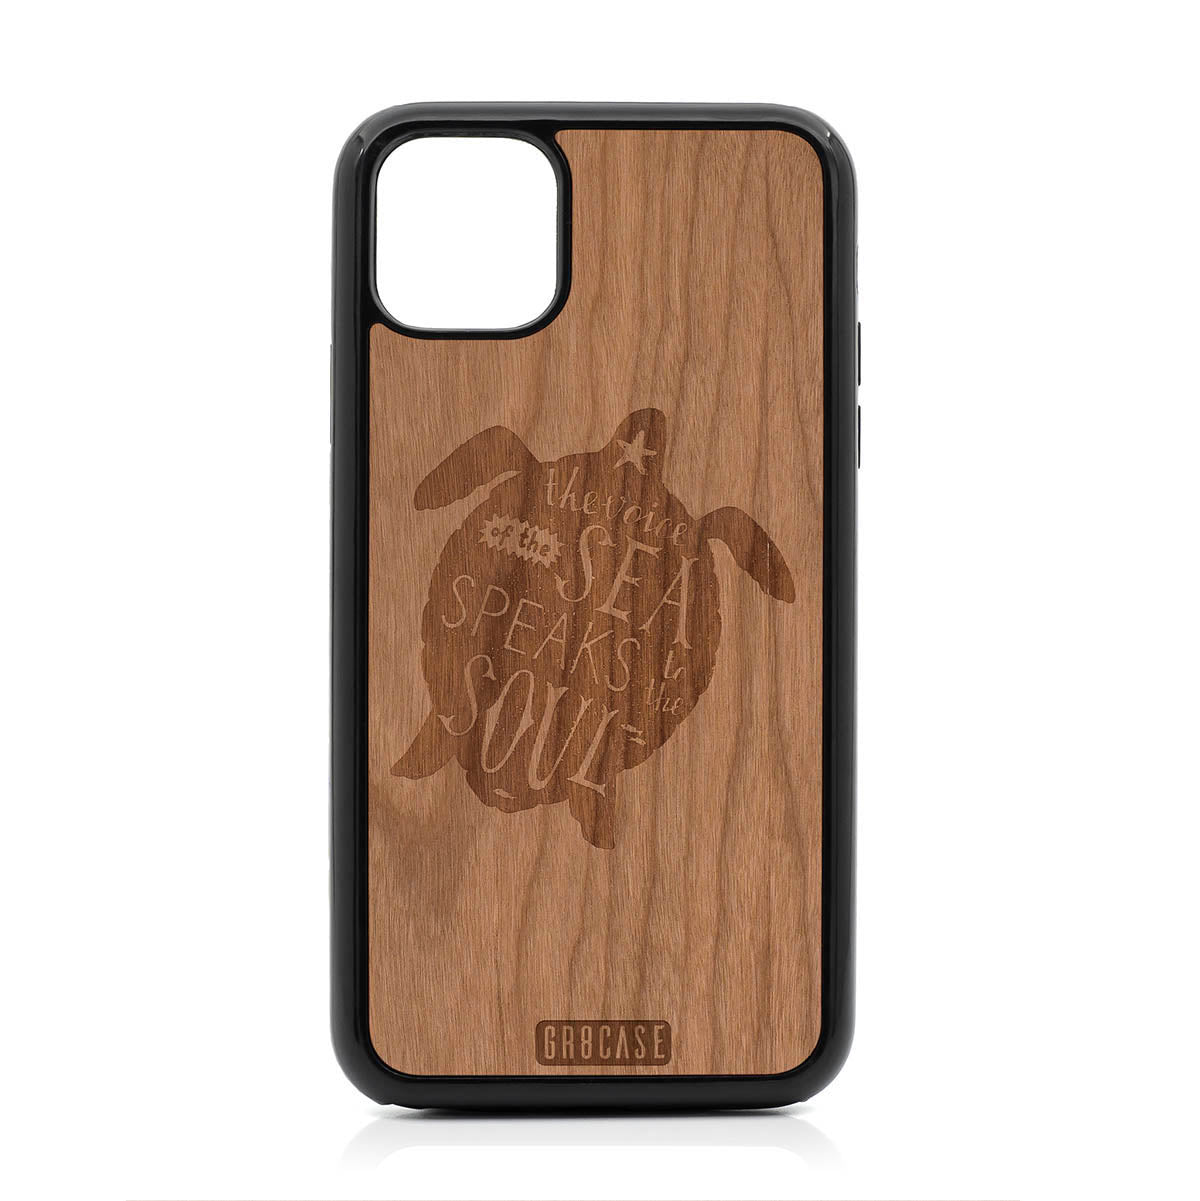 The Voice Of The Sea Speaks To The Soul (Turtle) Design Wood Case For iPhone 11 Pro